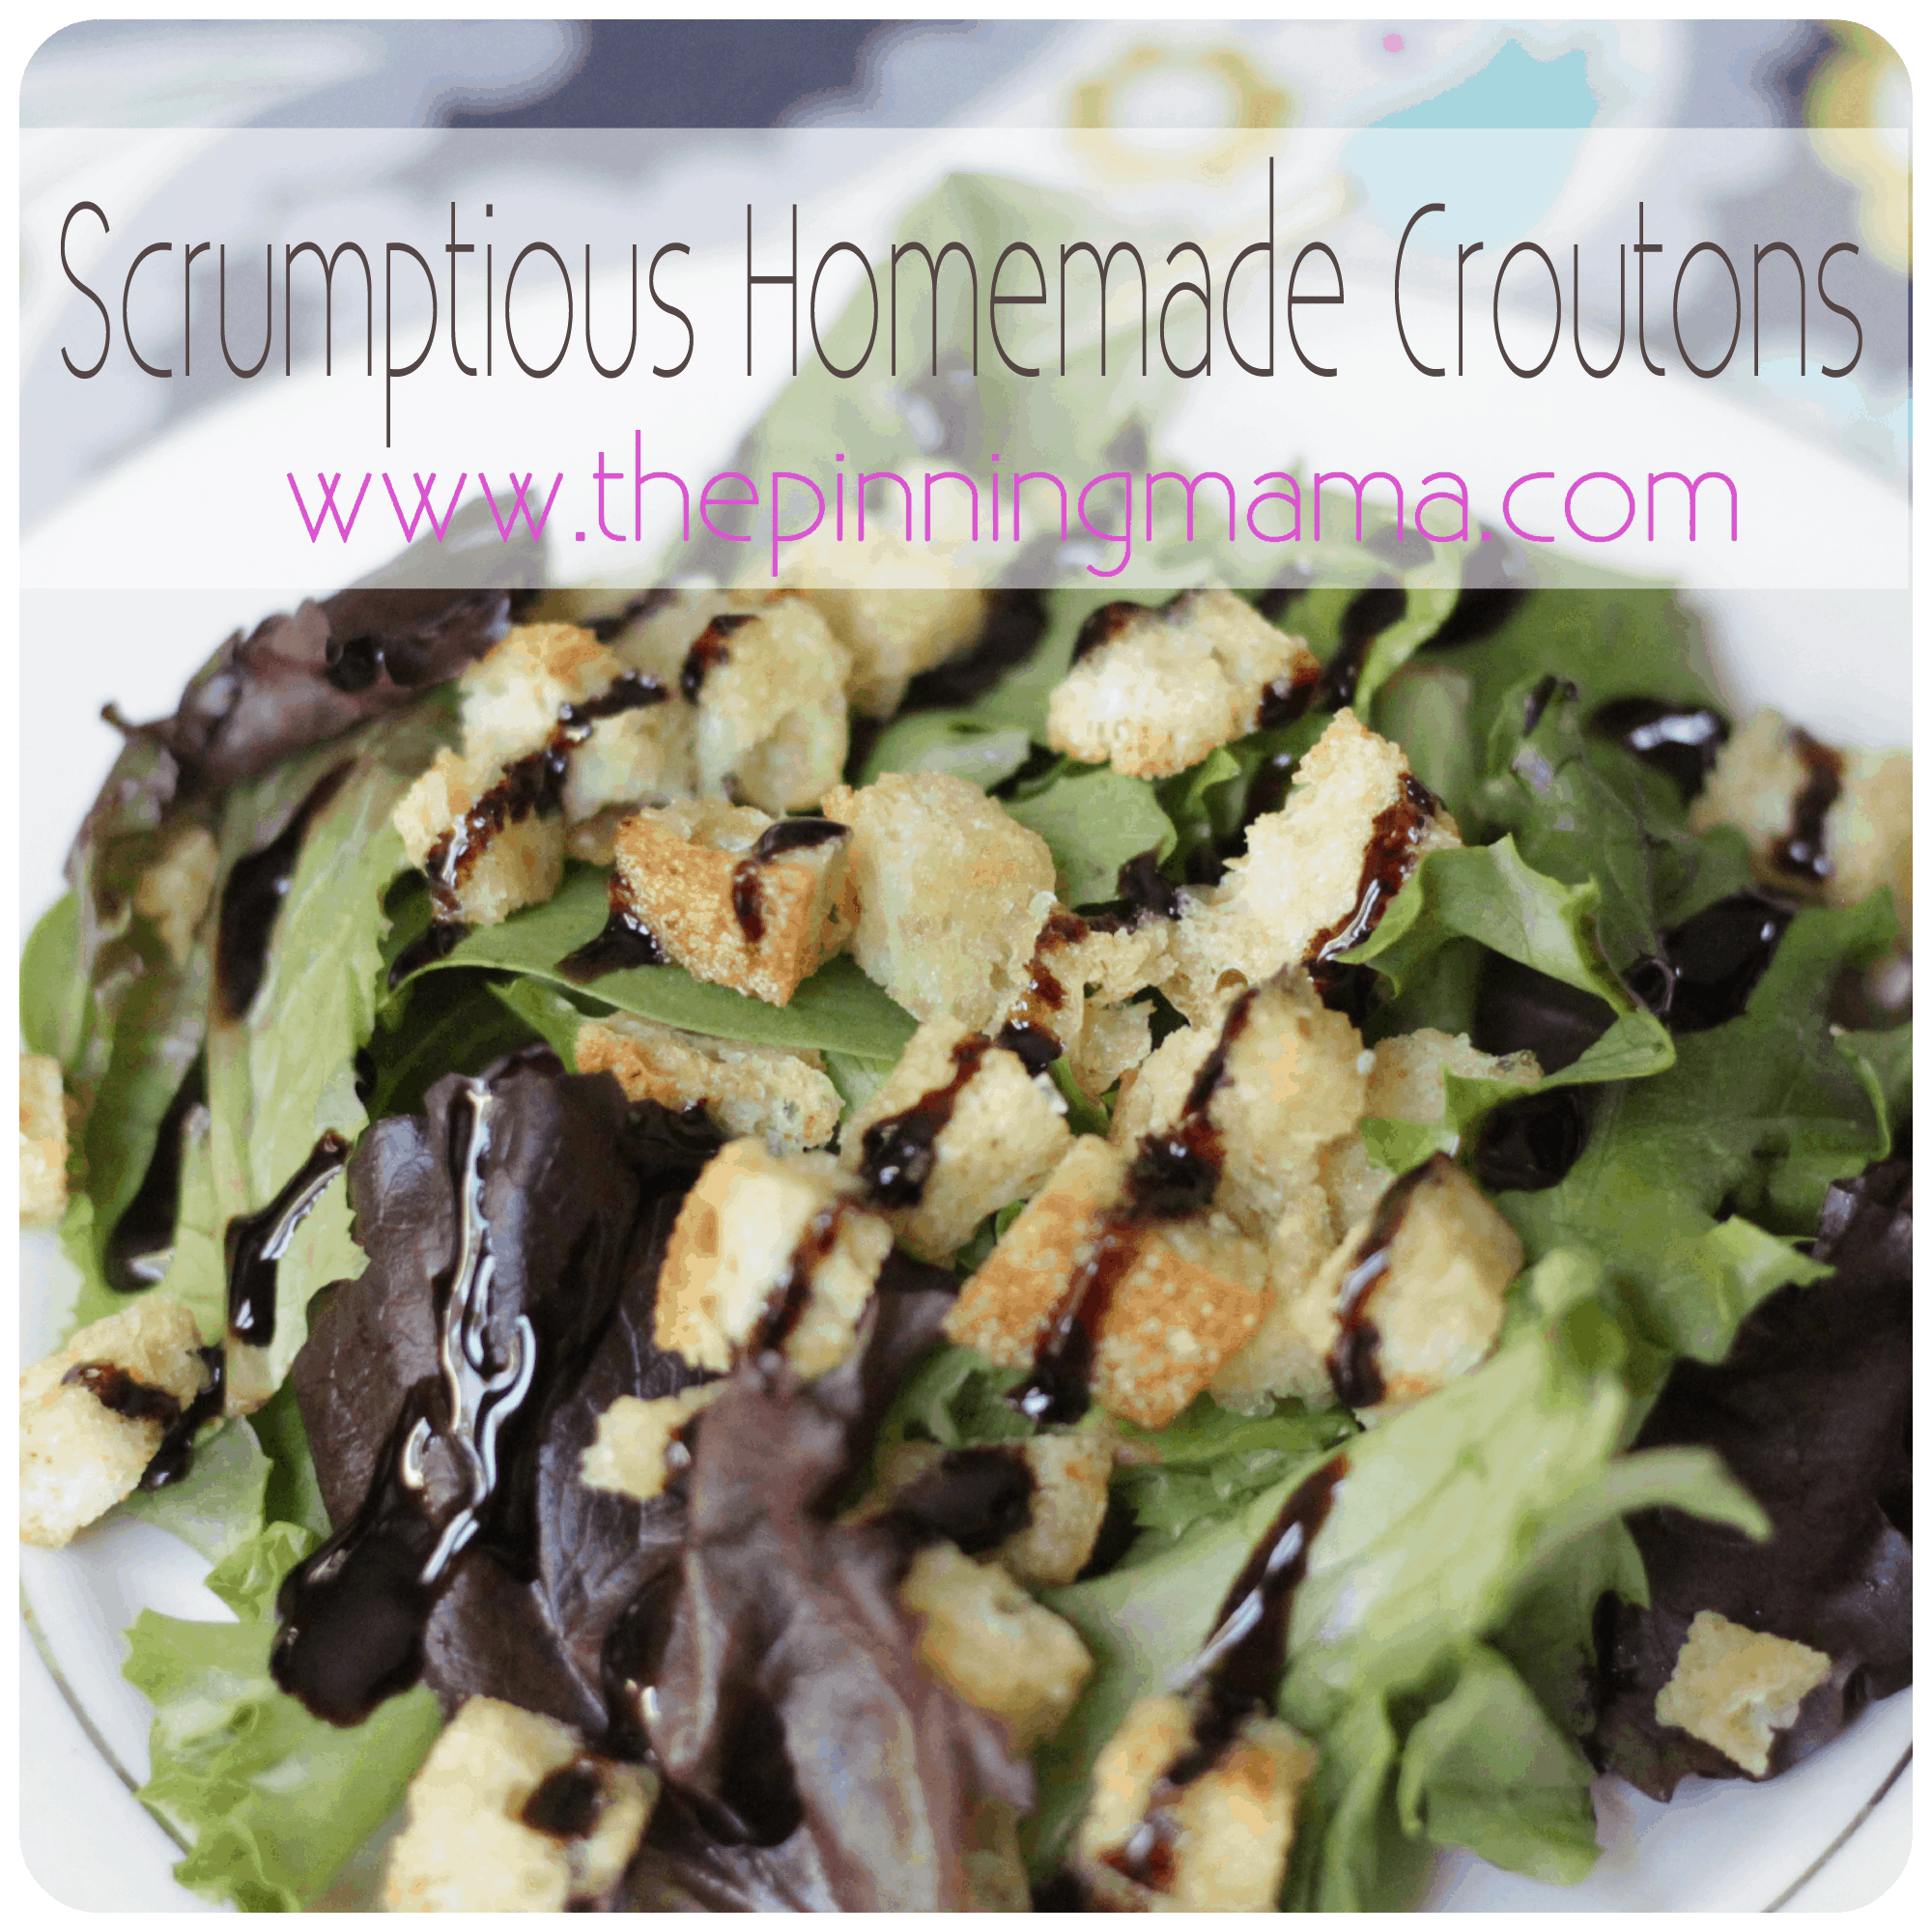 How to make scrumptious homemade croutons. These are amazing and totally make a salad! www.thepinningmama.com